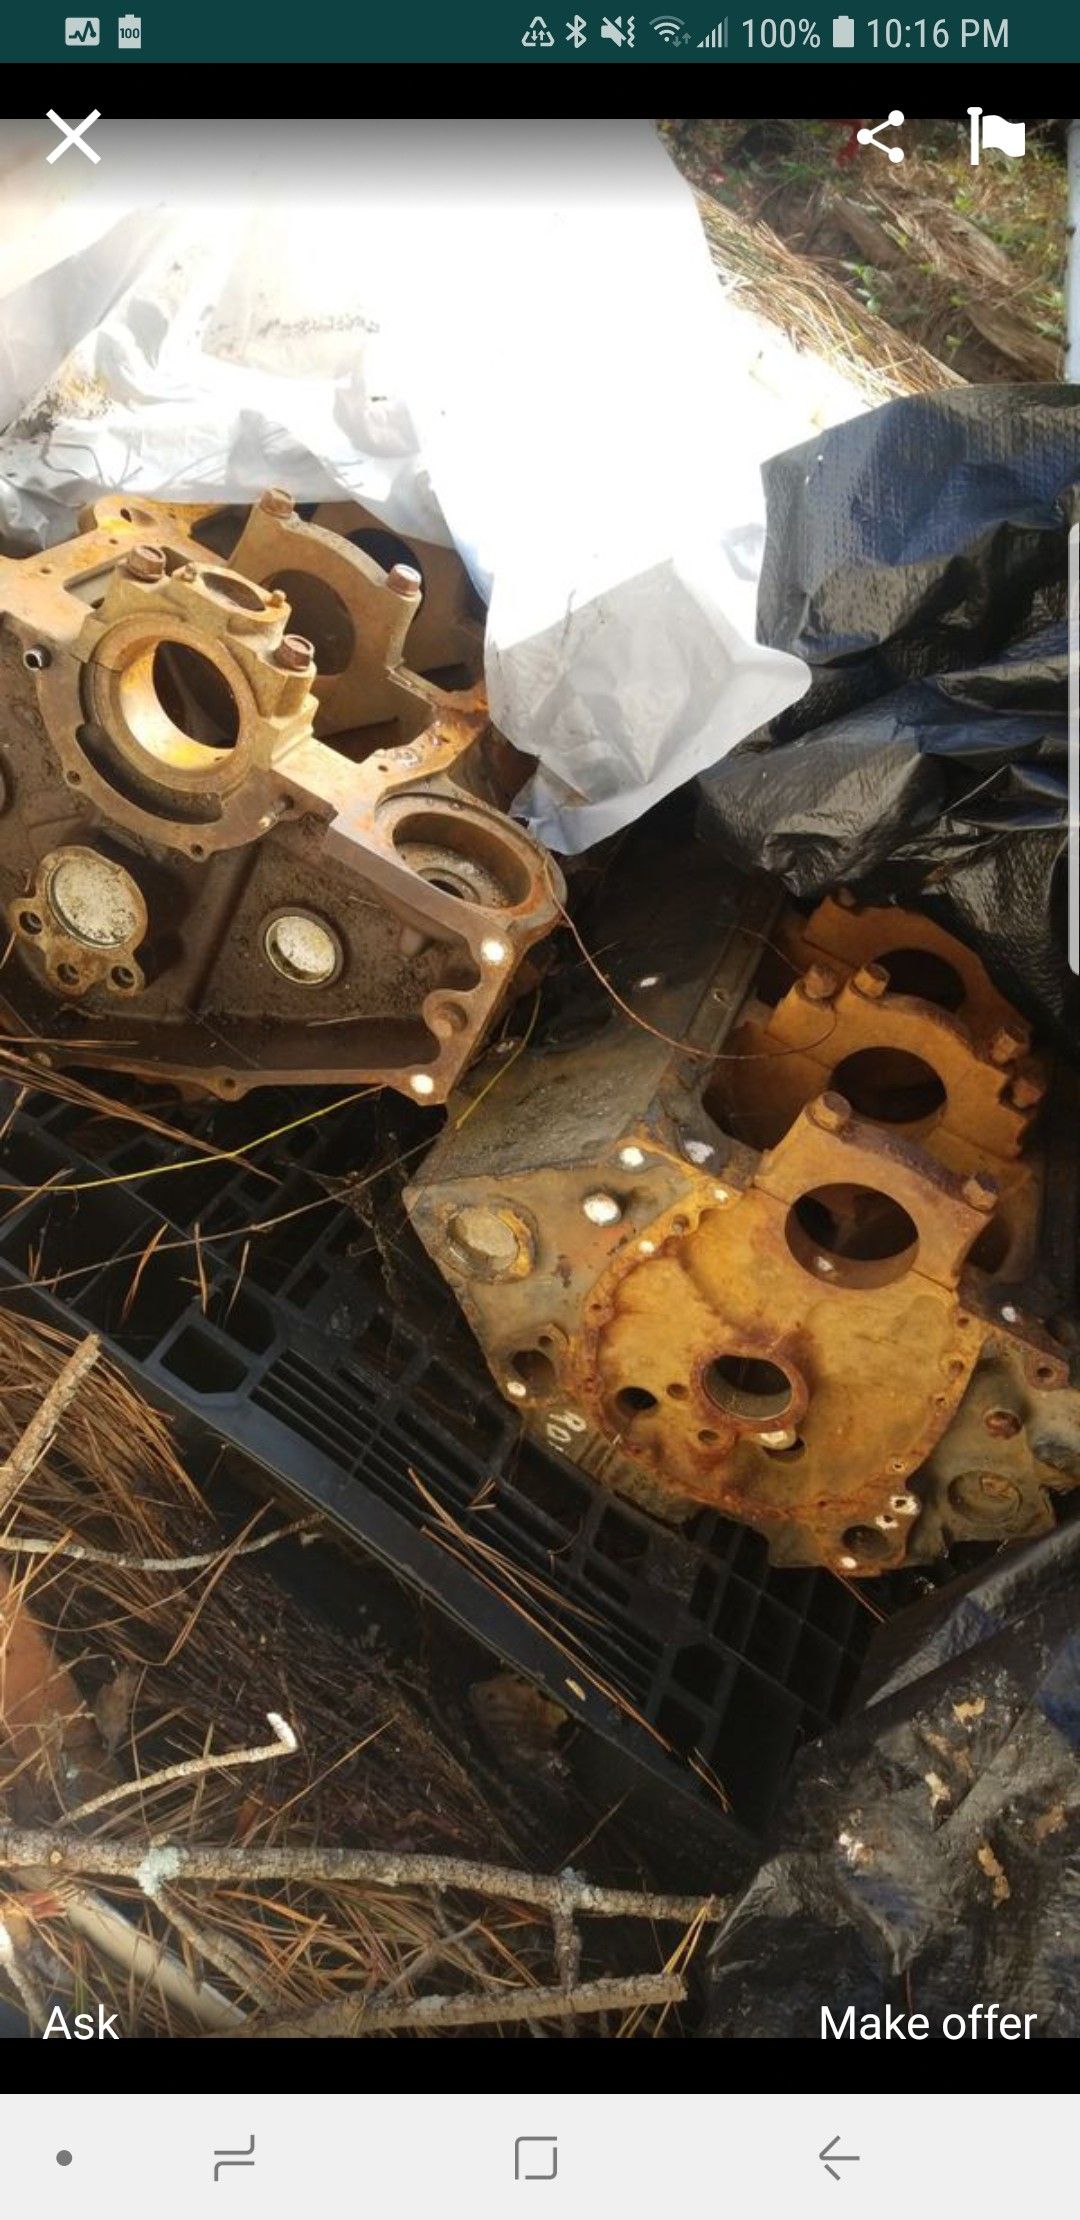 2 Chevy 350 blocks. Multiple Chevy engine parts